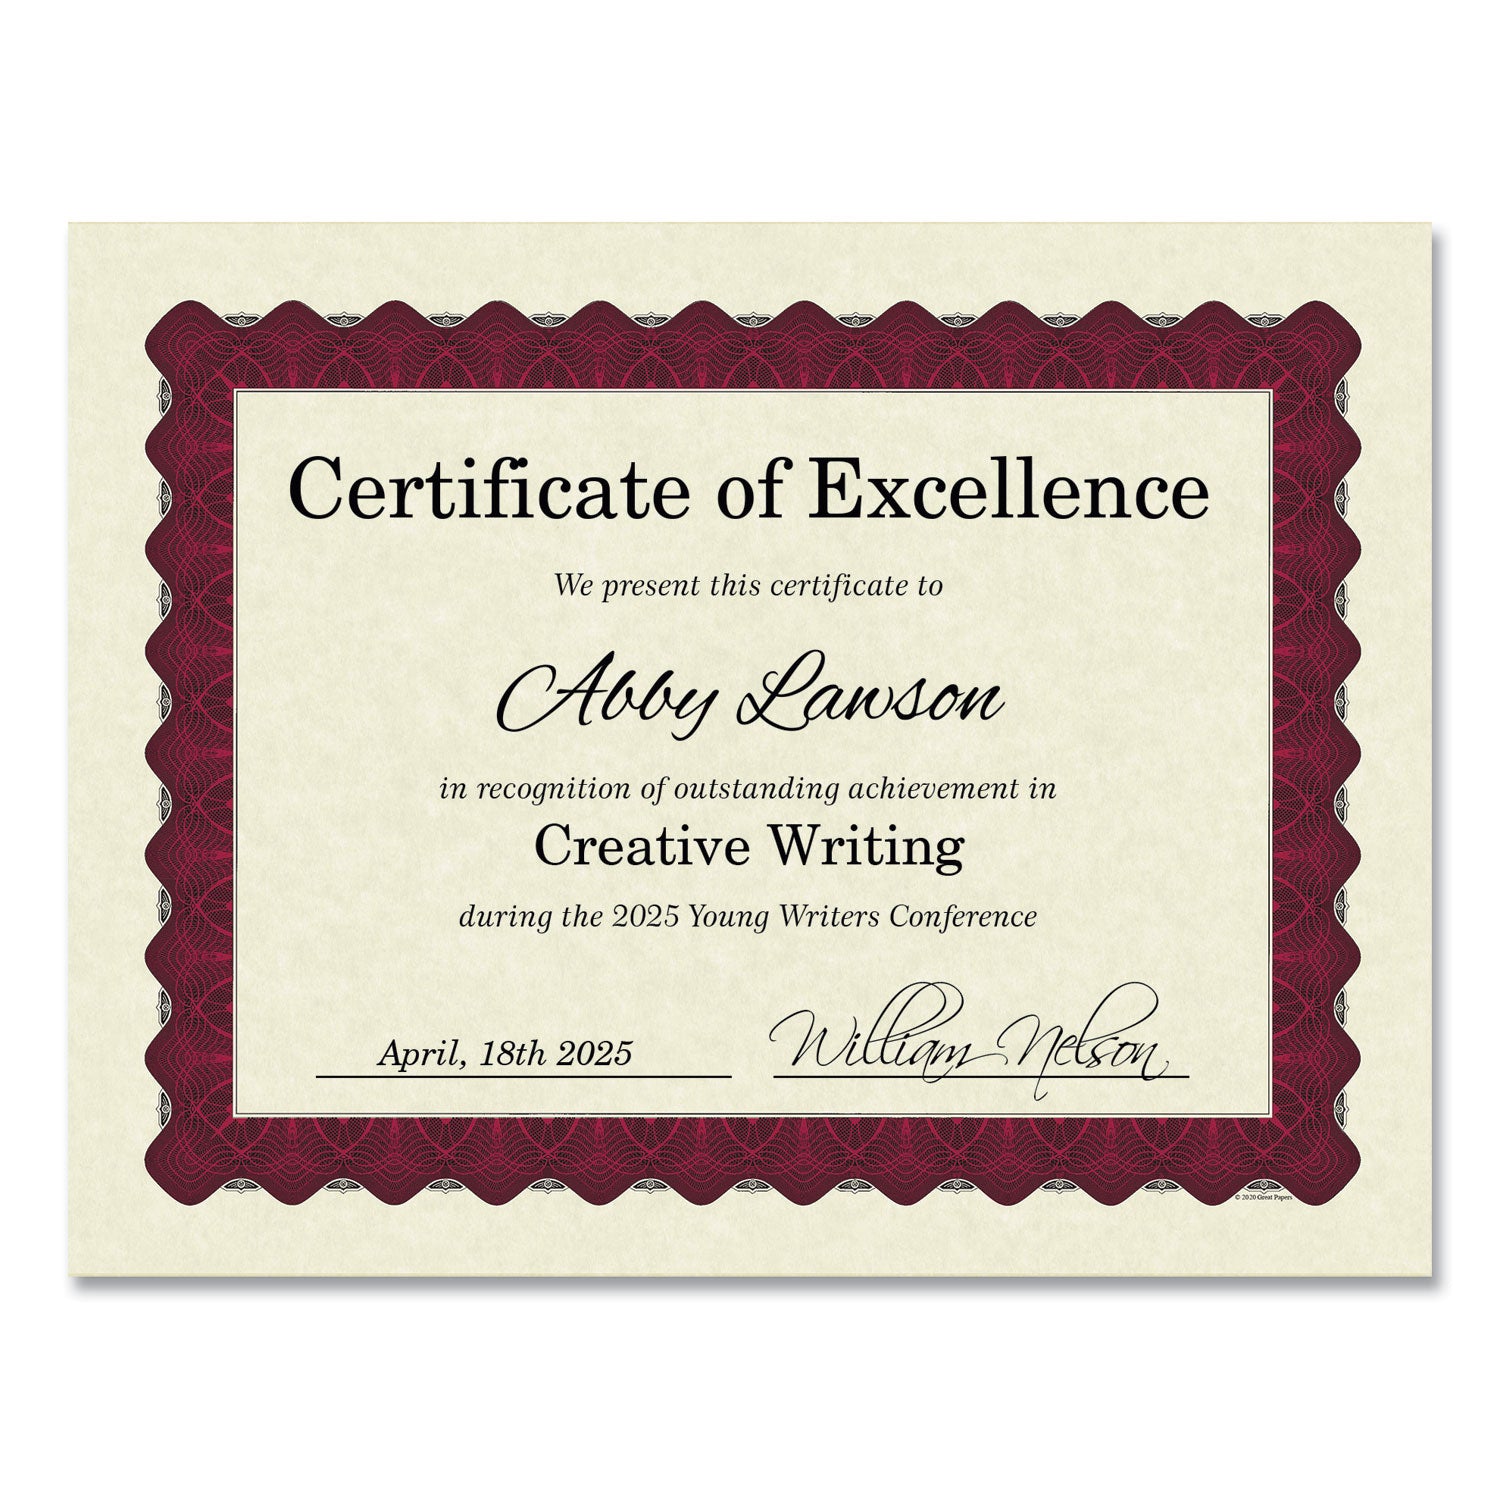 metallic-border-certificates-11-x-85-ivory-red-with-red-border-100-pack_grp934100 - 1